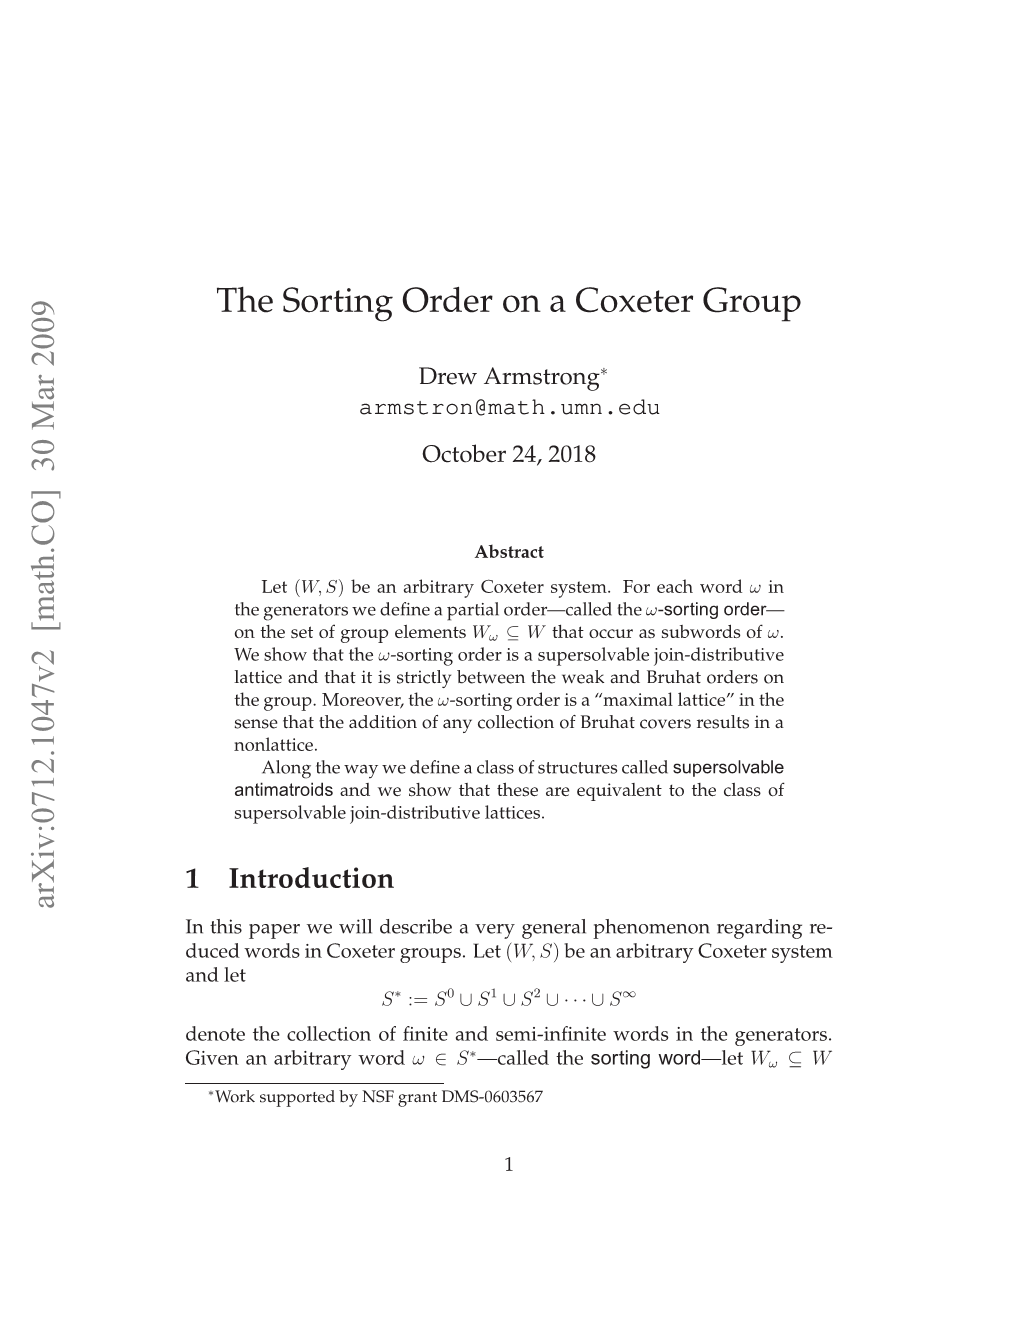 The Sorting Order on a Coxeter Group